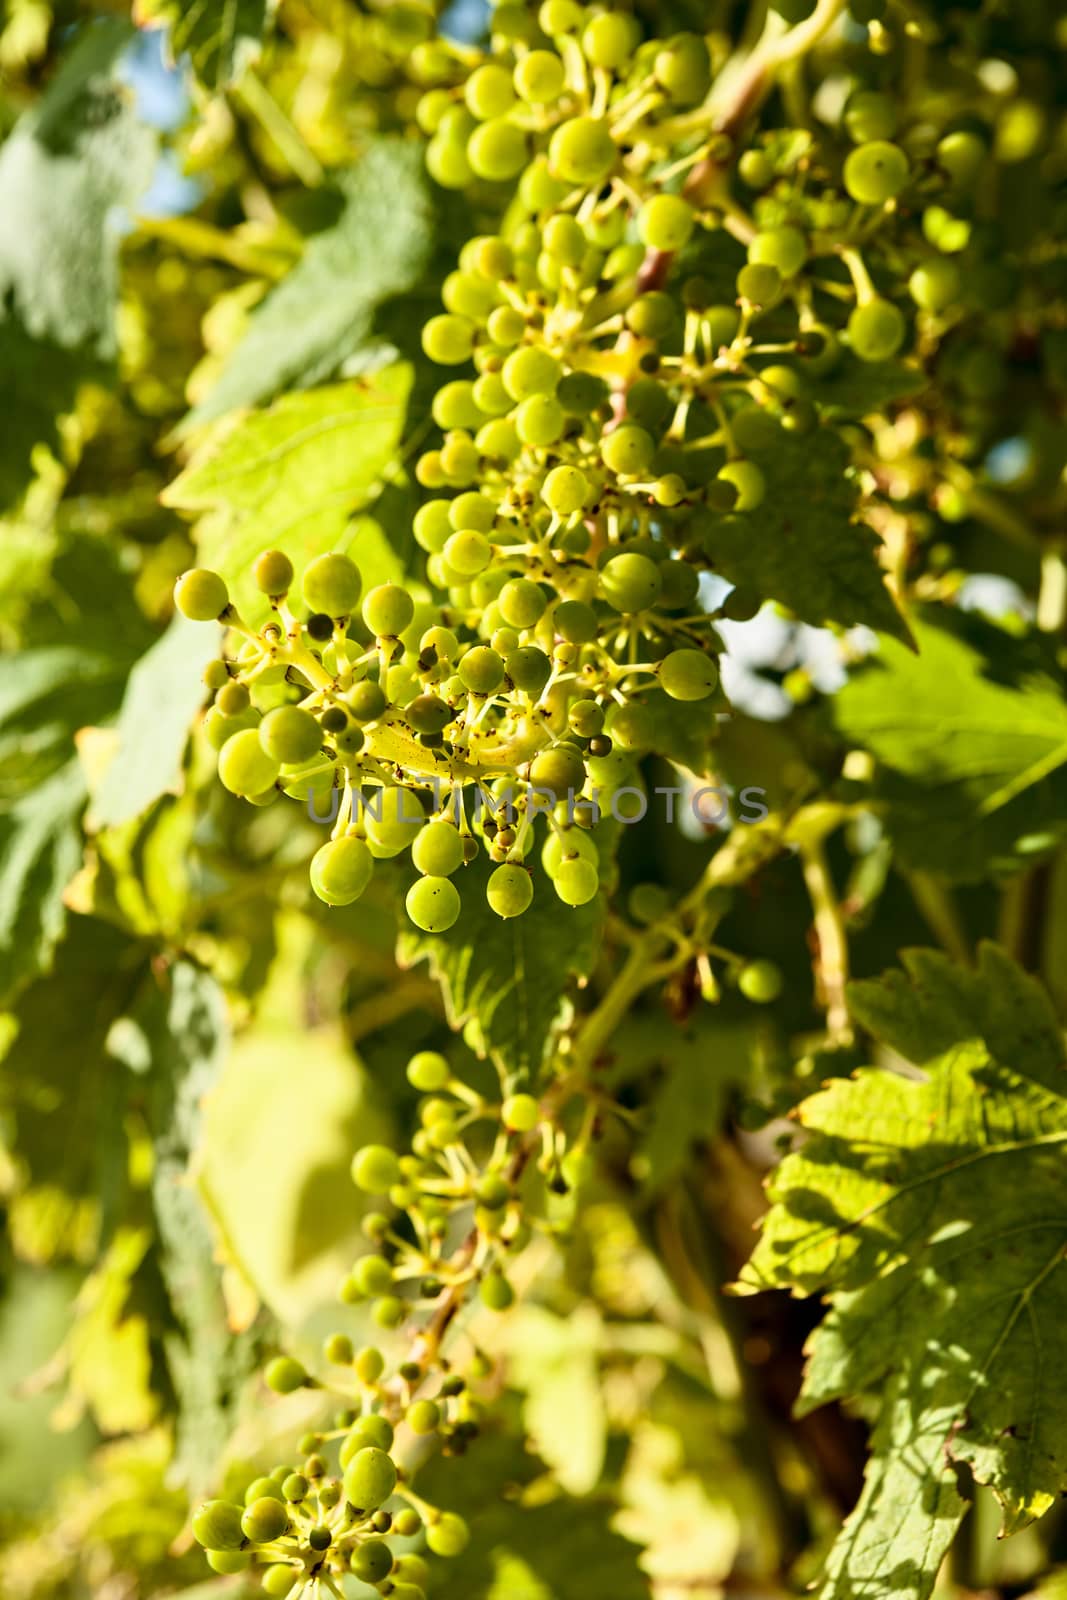 Closeup of small green grapes in a vineyard